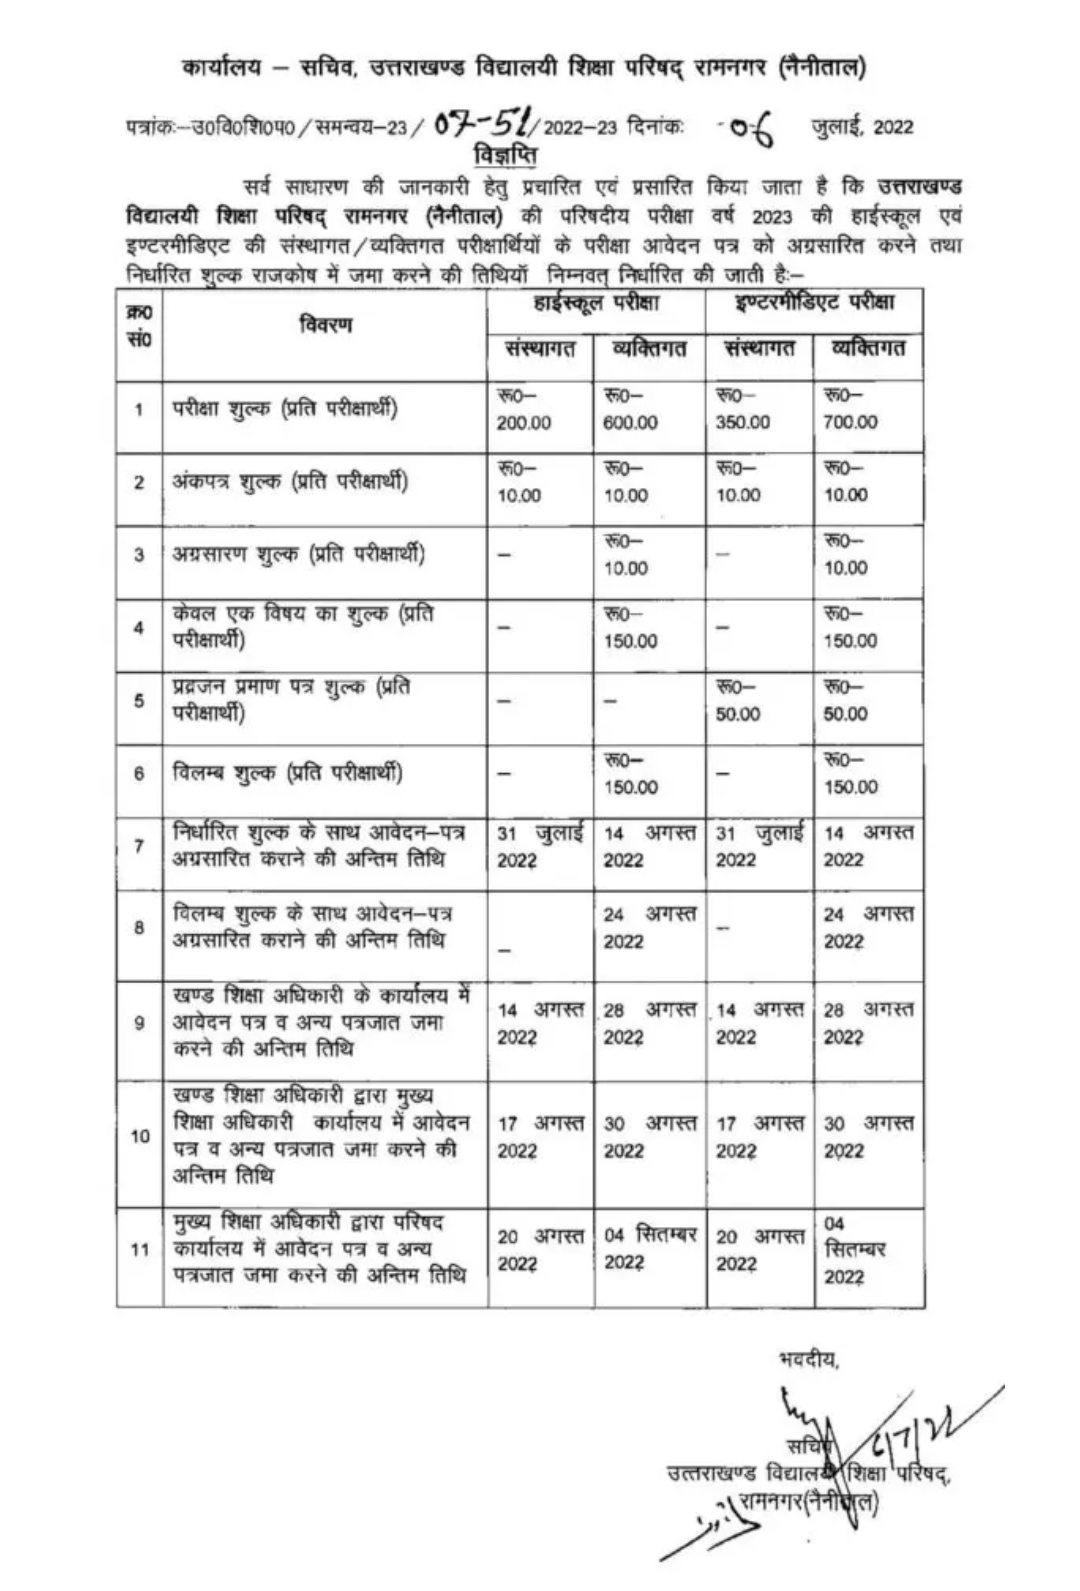 Uttarakhand: Big news for 10th & 12th board candidates, time table released to application and fee 2022. Uttarakhand board news 2022